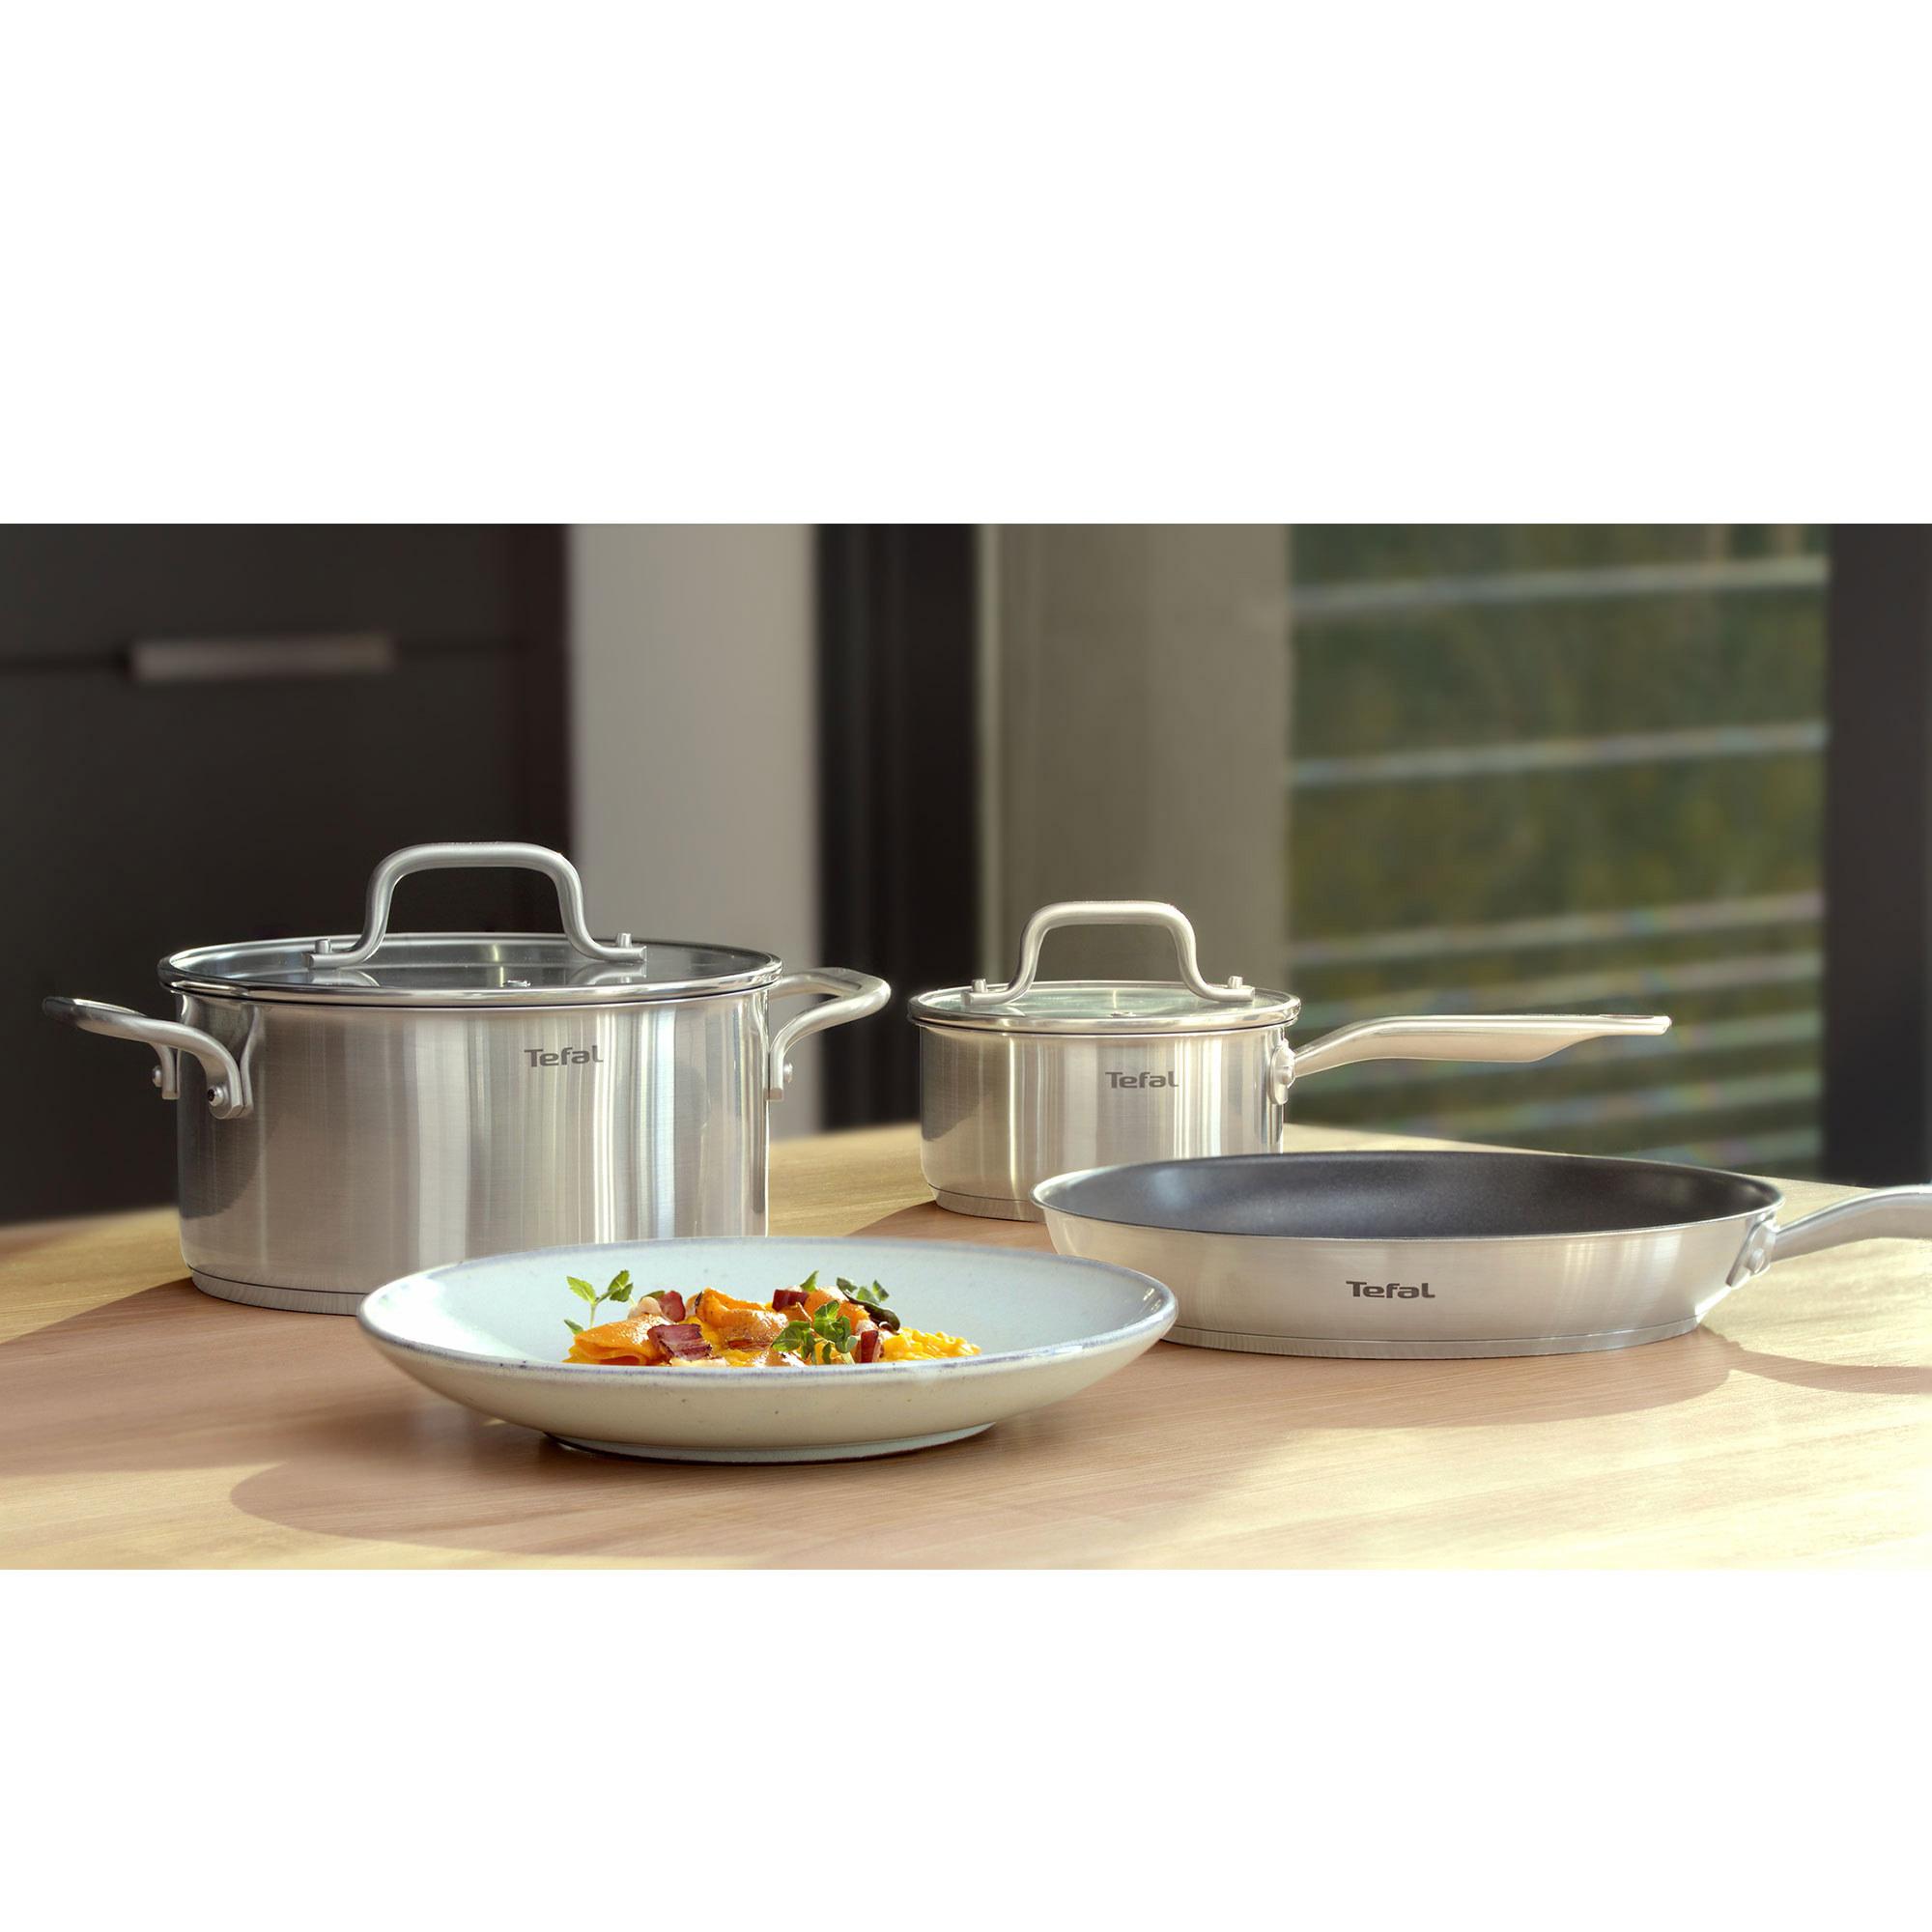 Tefal Virtuoso Stainless Steel Stewpot 24cm - 5.4L Image 4